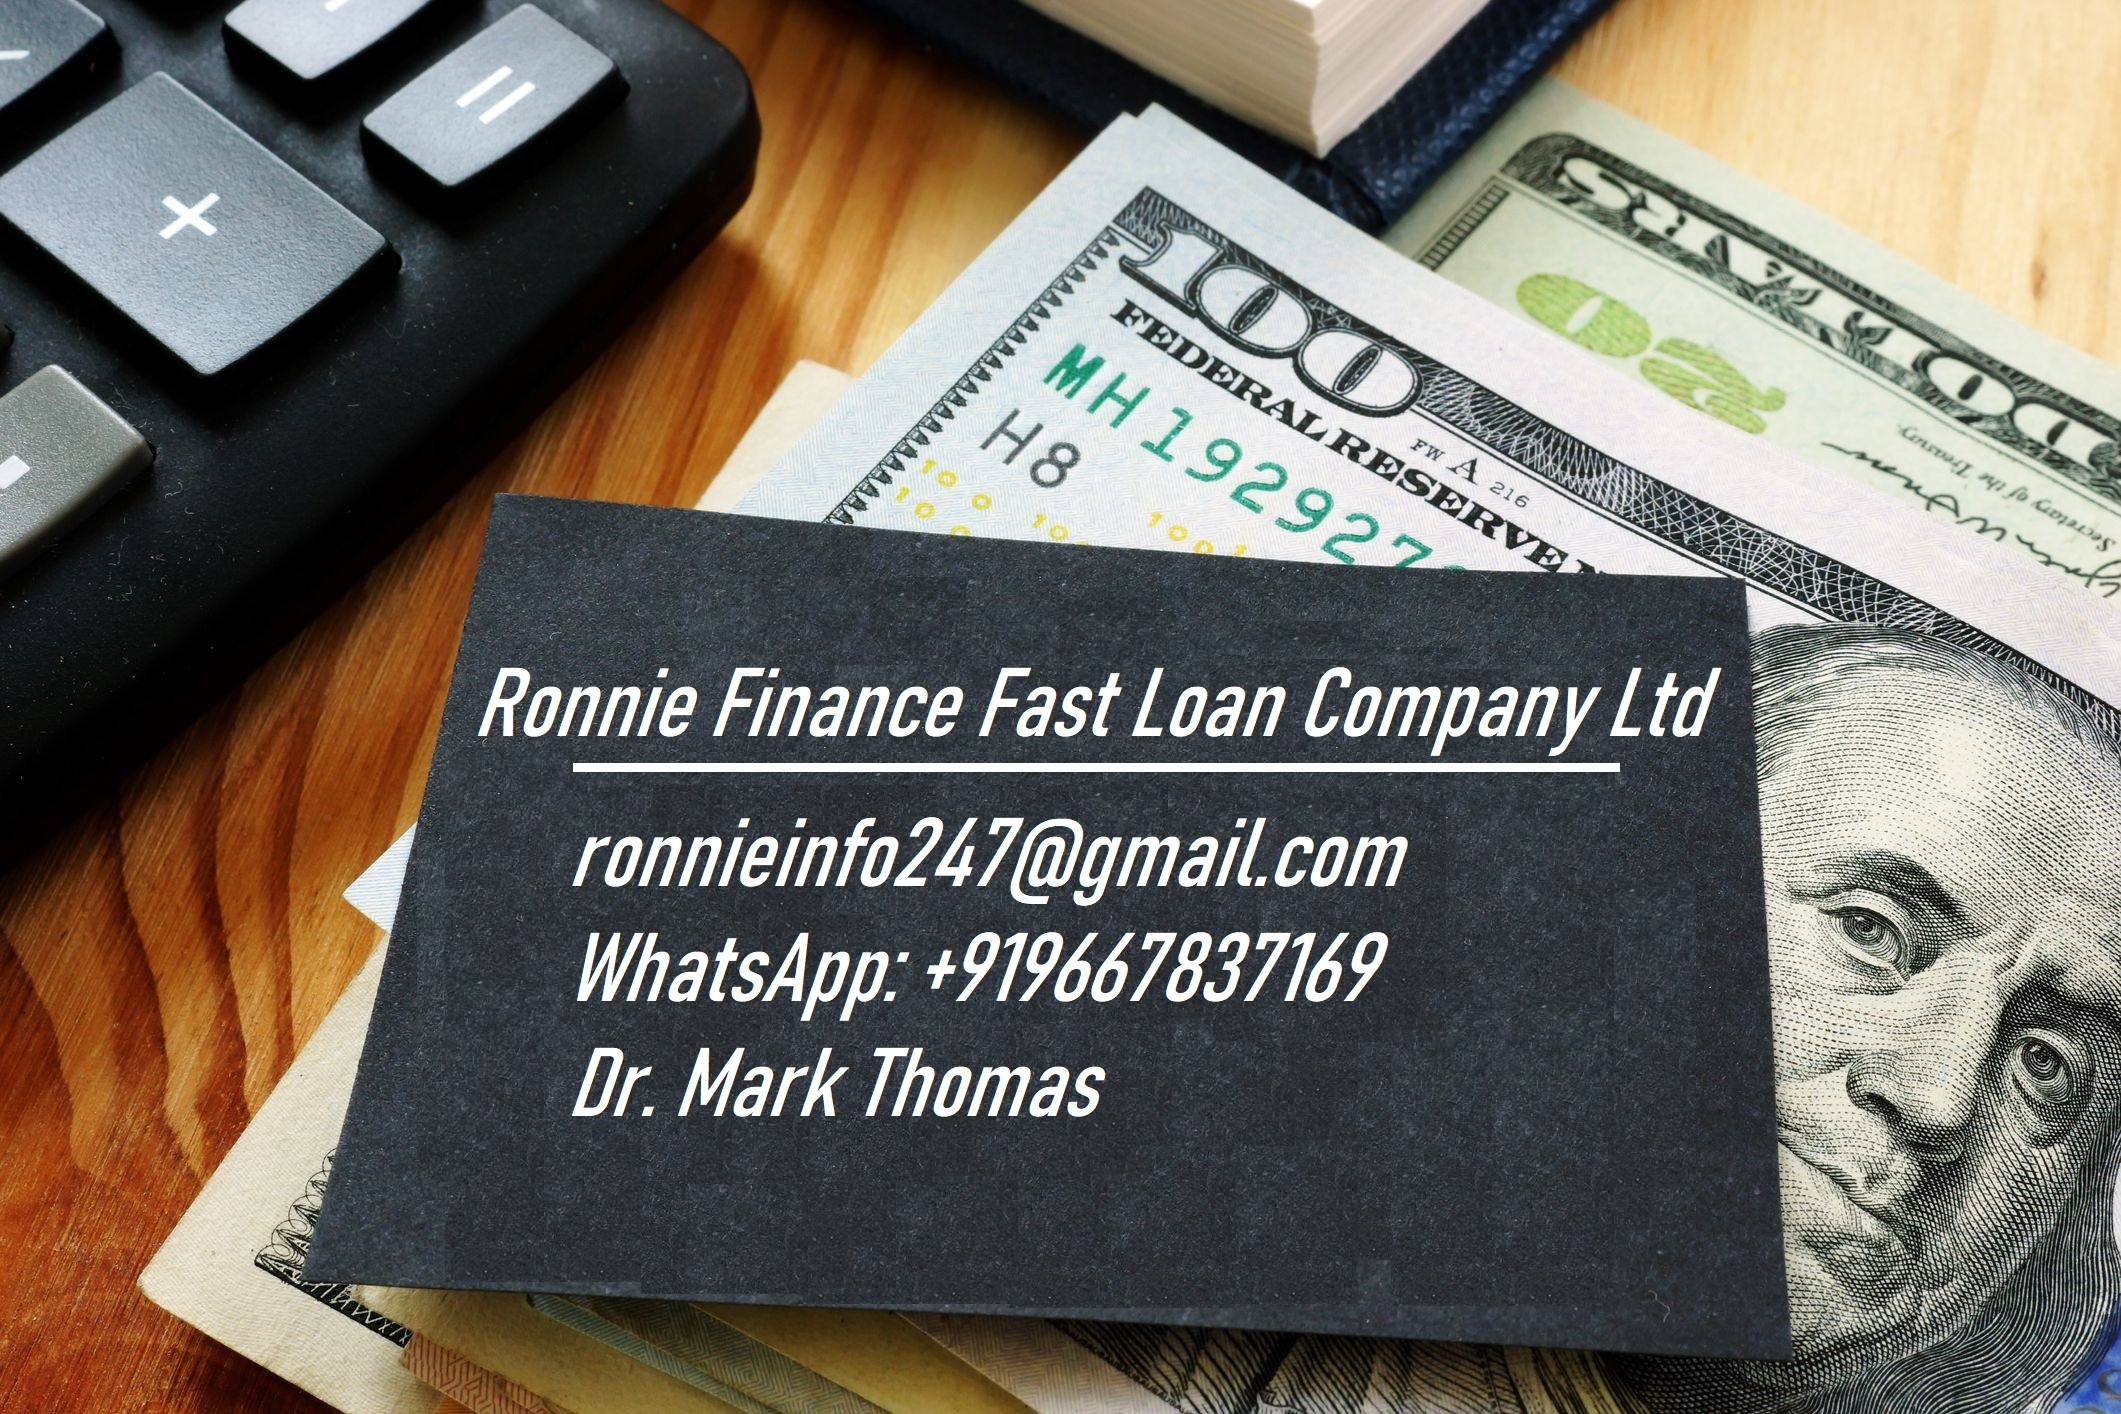 Queue Management System-  Ronnie Finance Fast Loan...